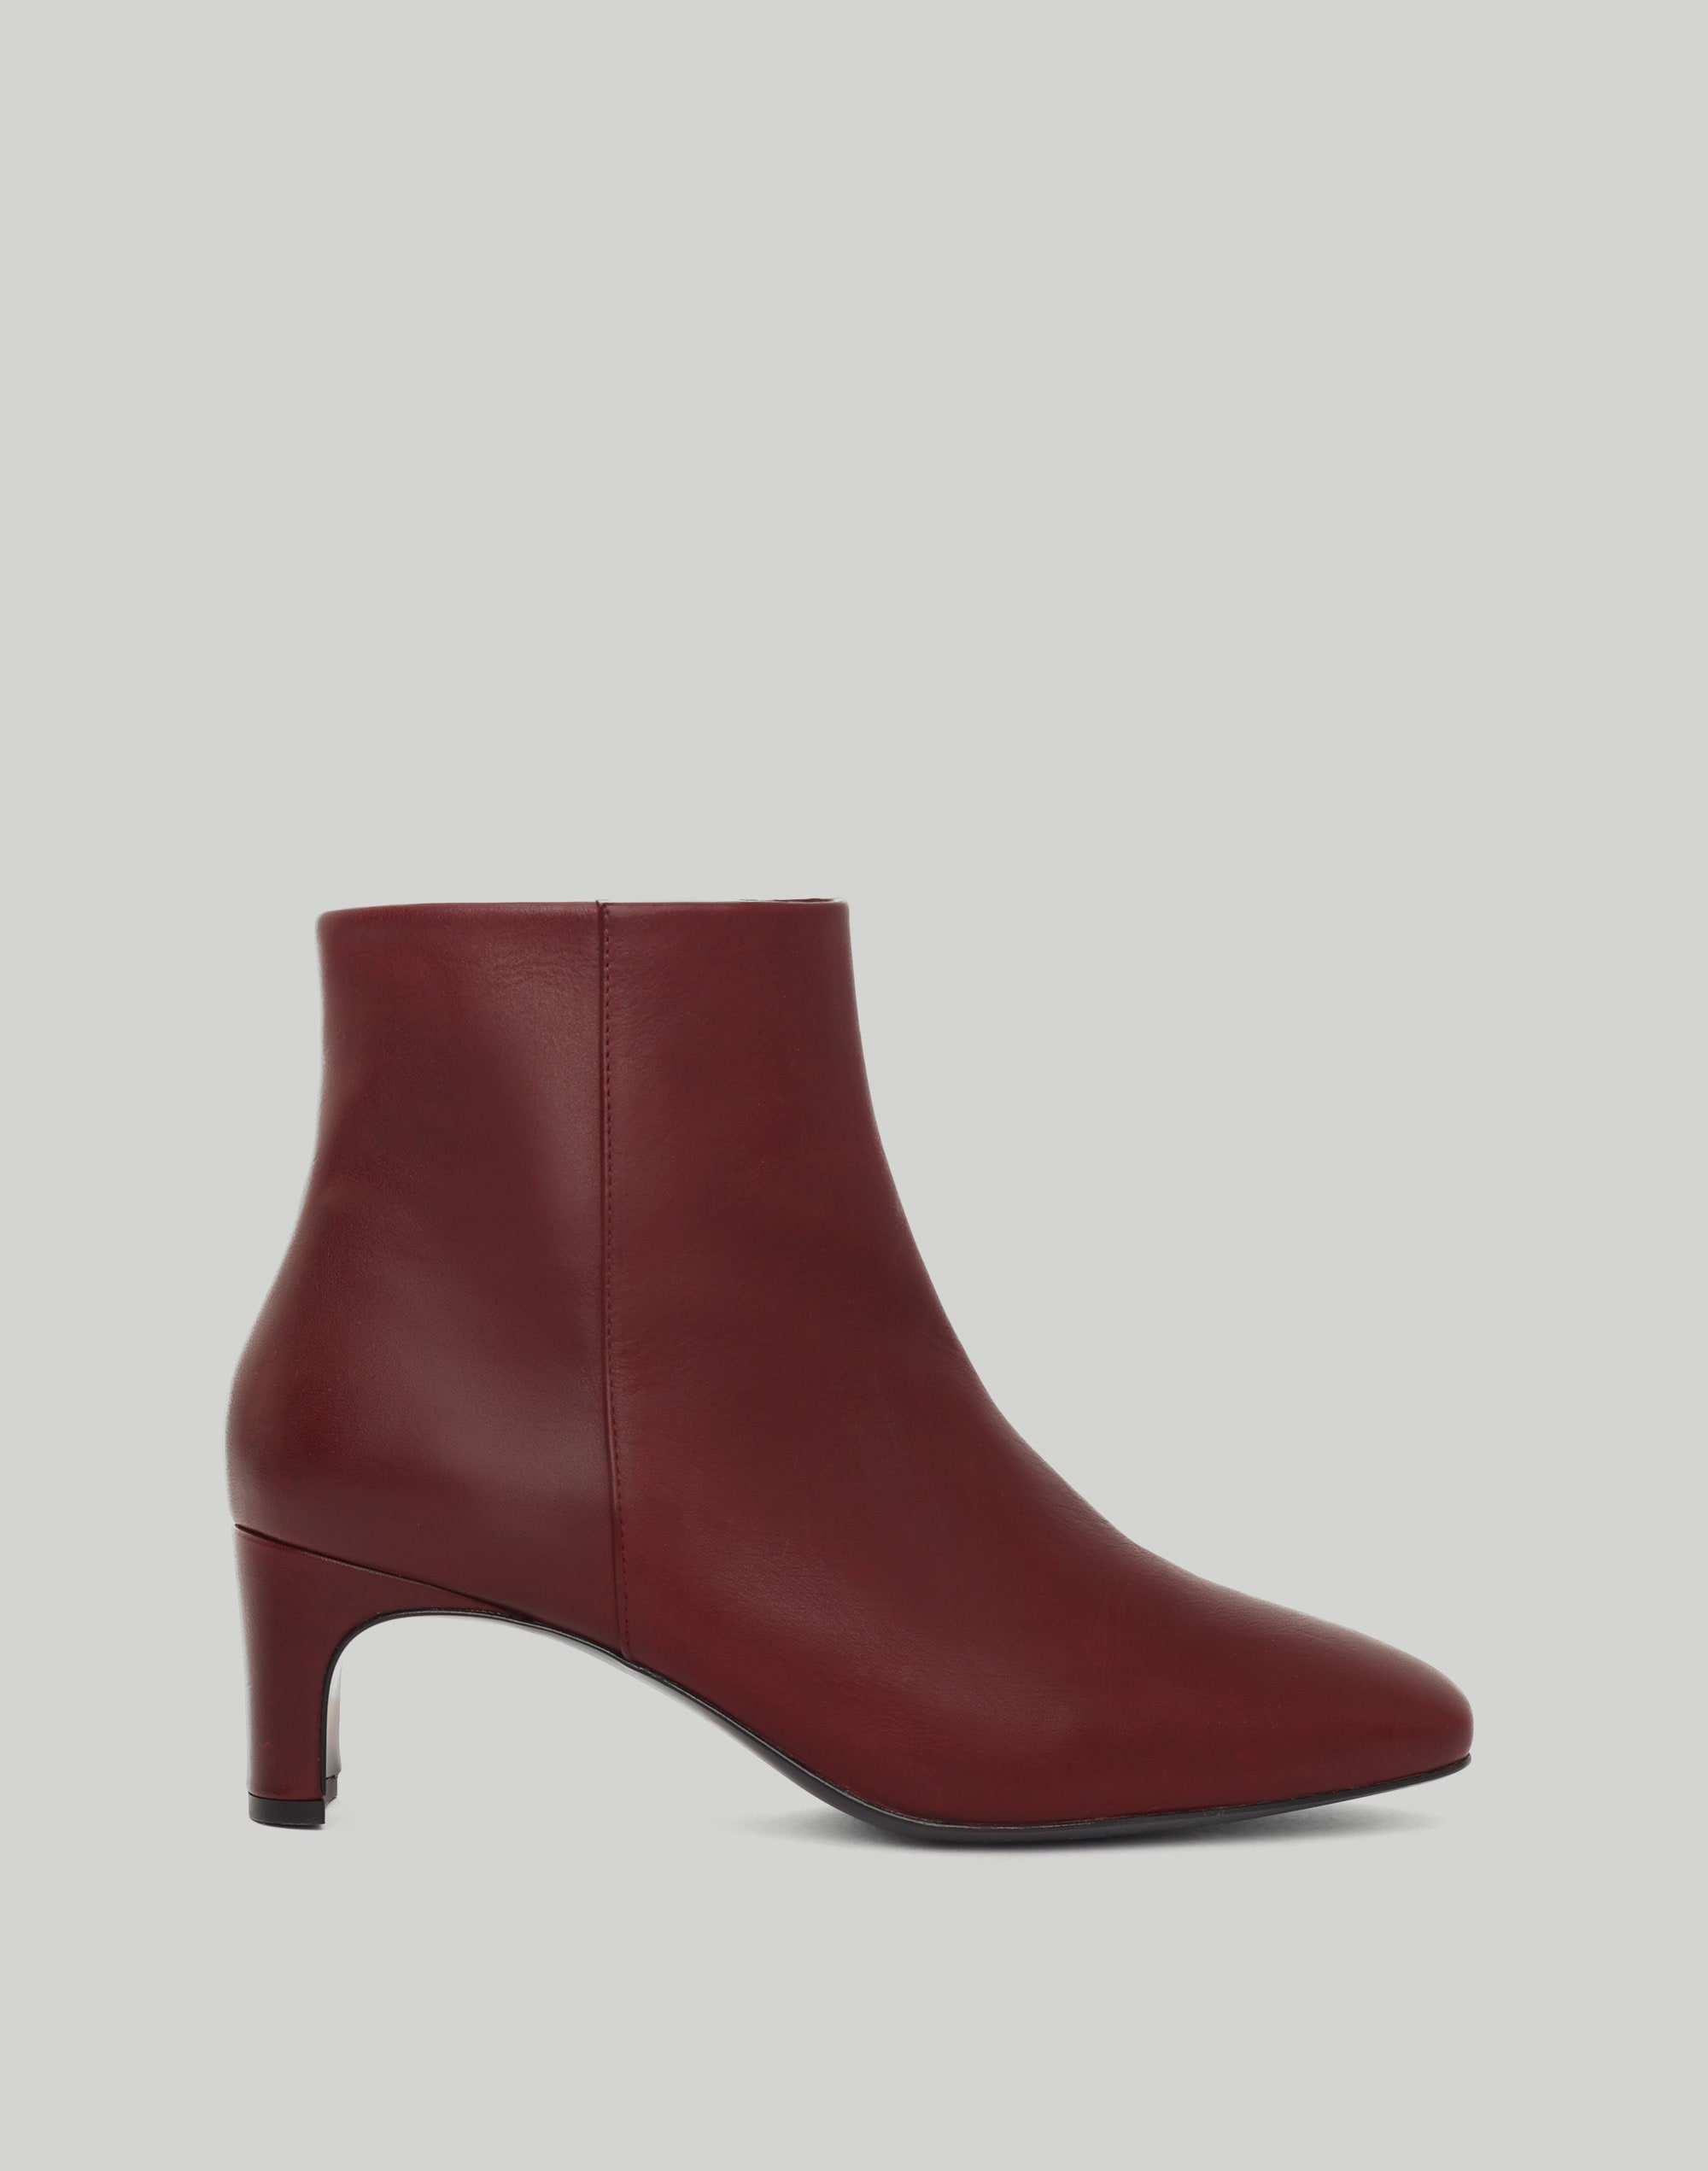 Maguire Salema Oxblood Boot